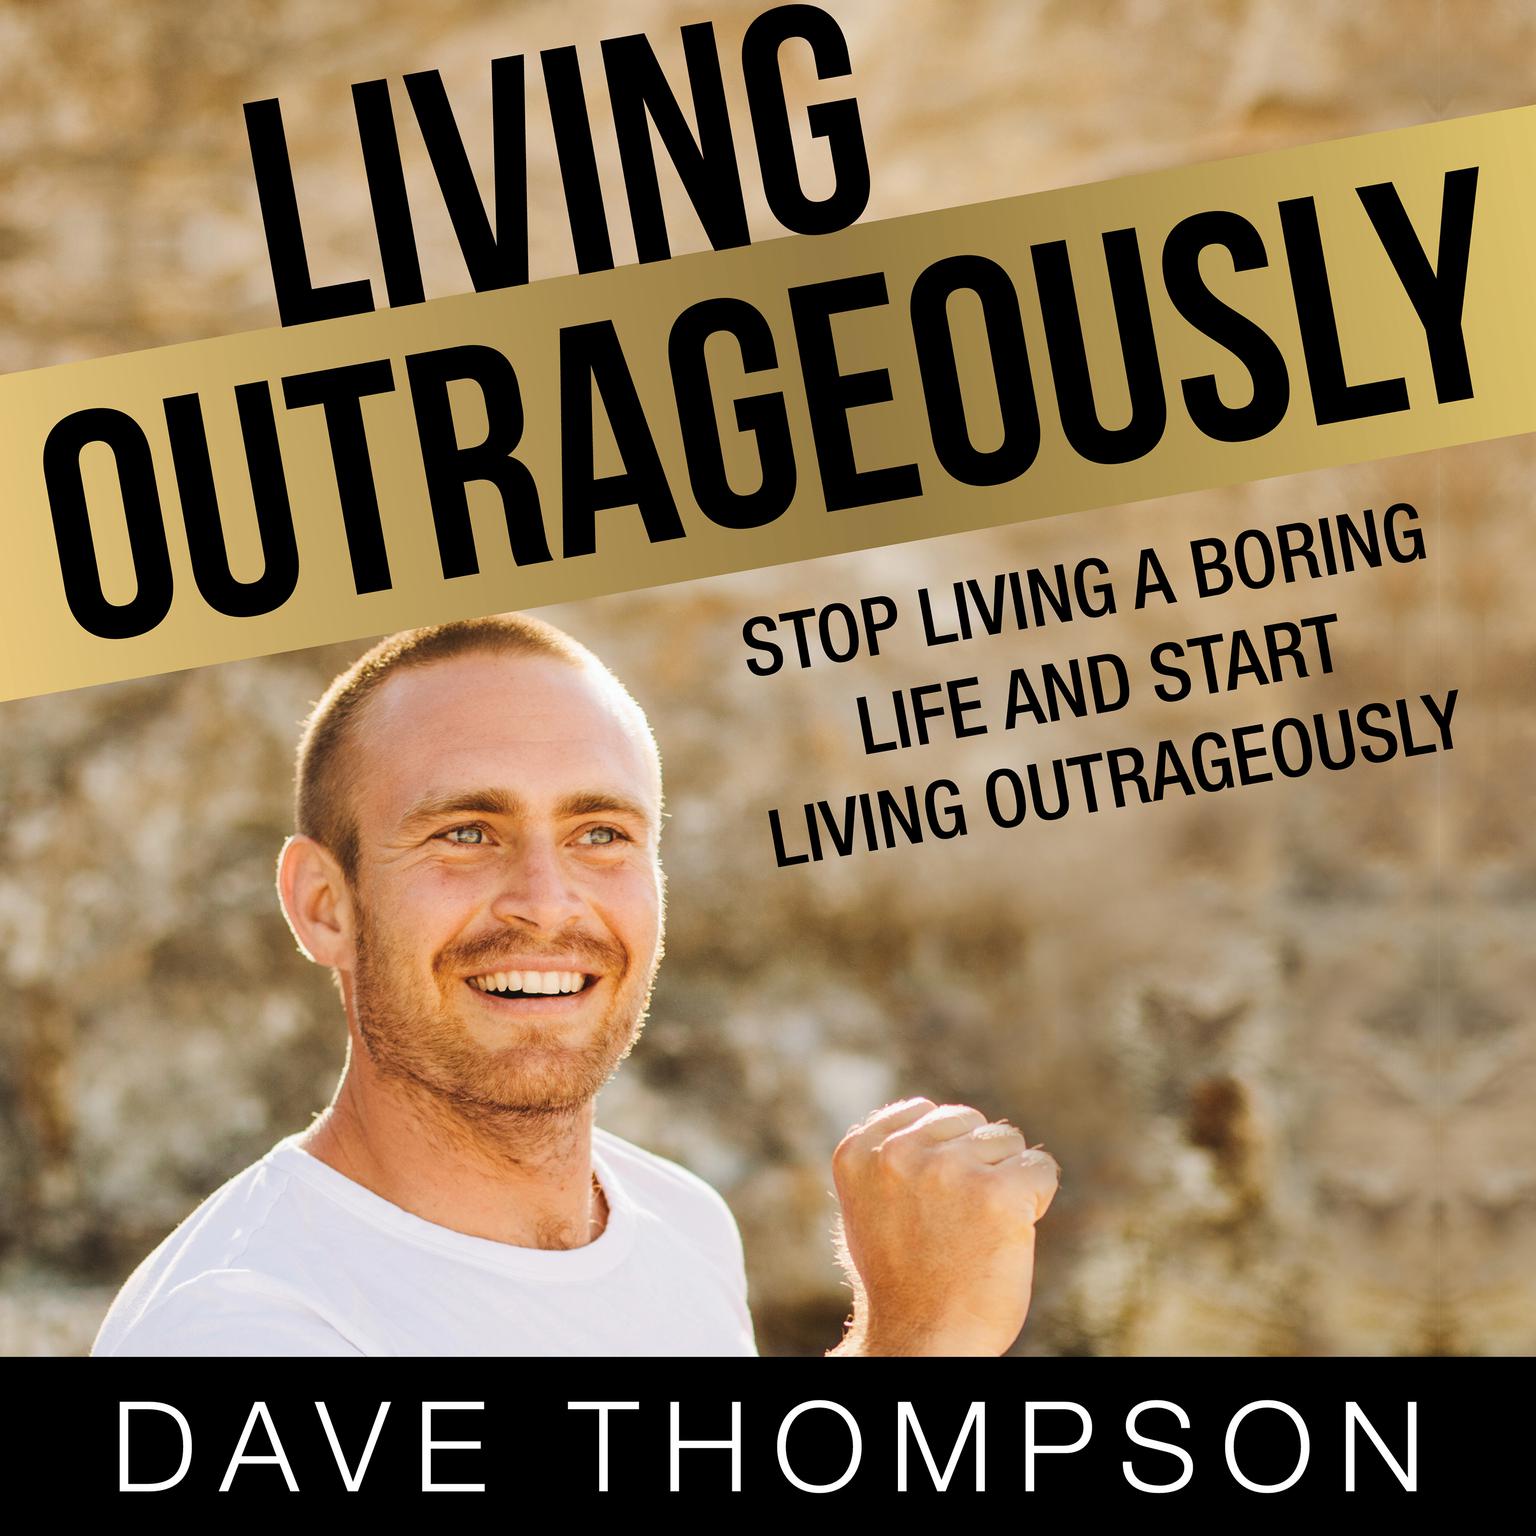 Living Outrageously Audiobook, by Dave Thompson